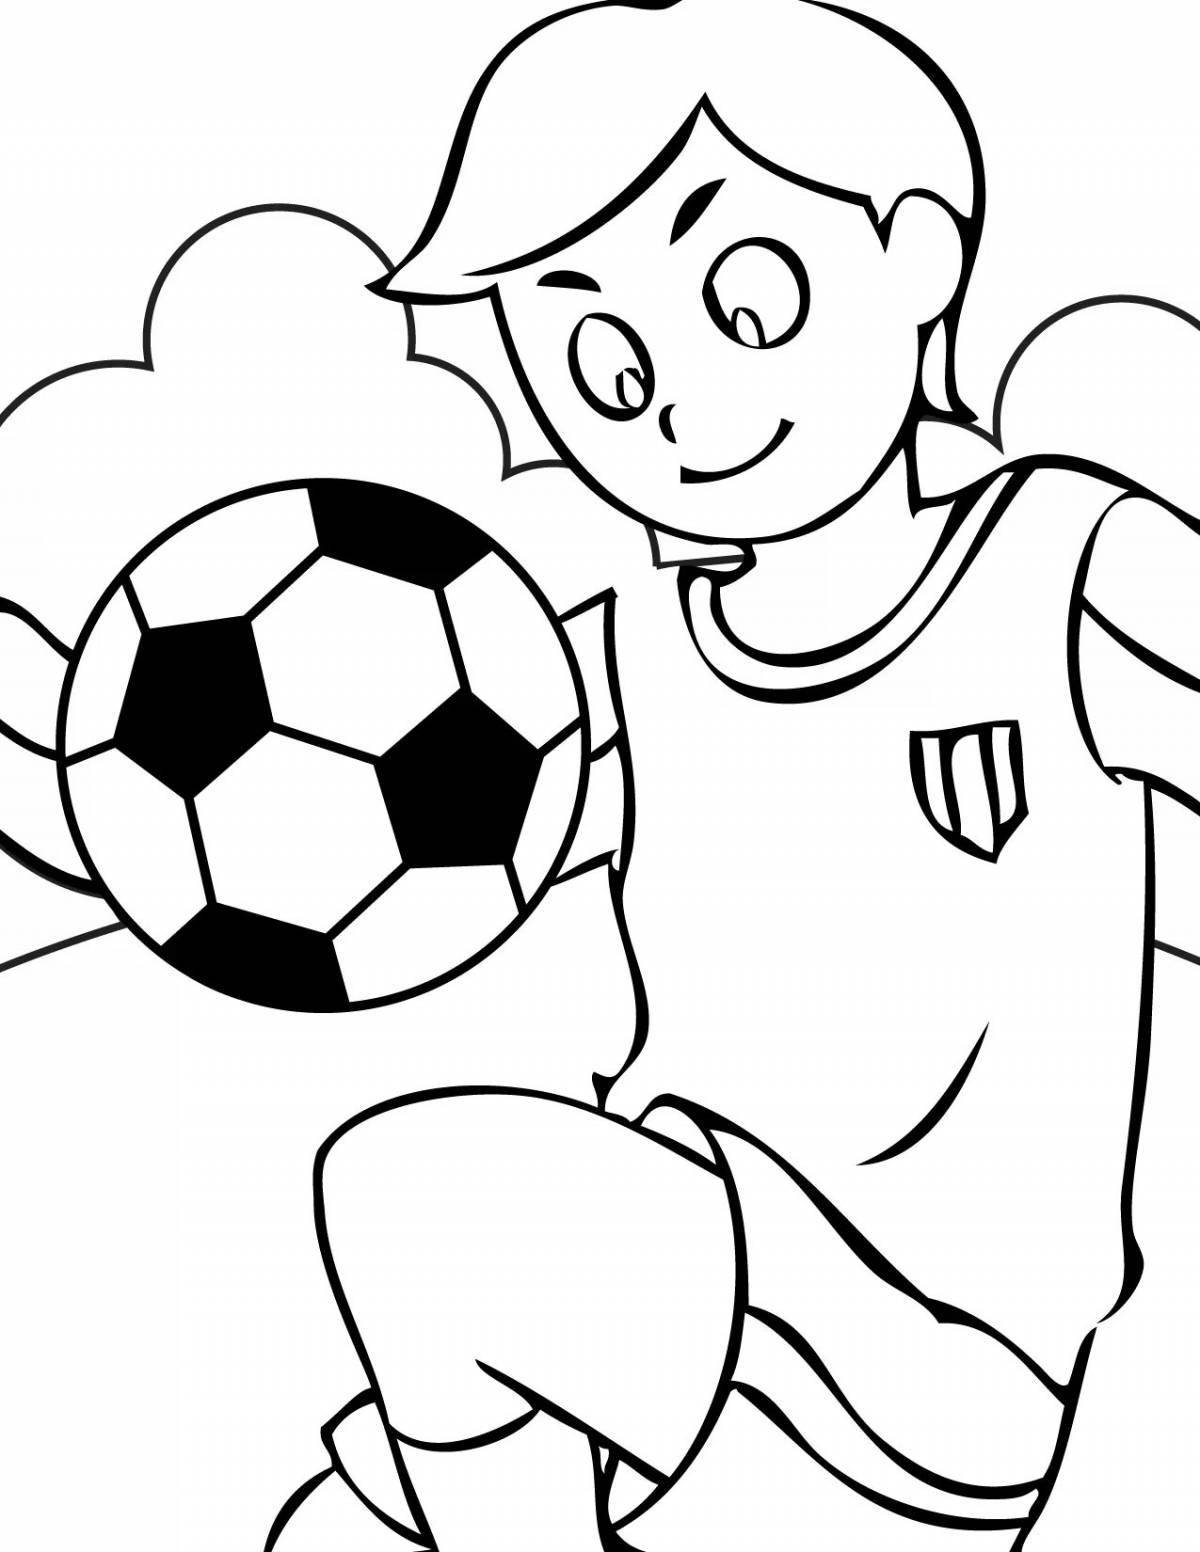 Fun sports coloring pages for kids